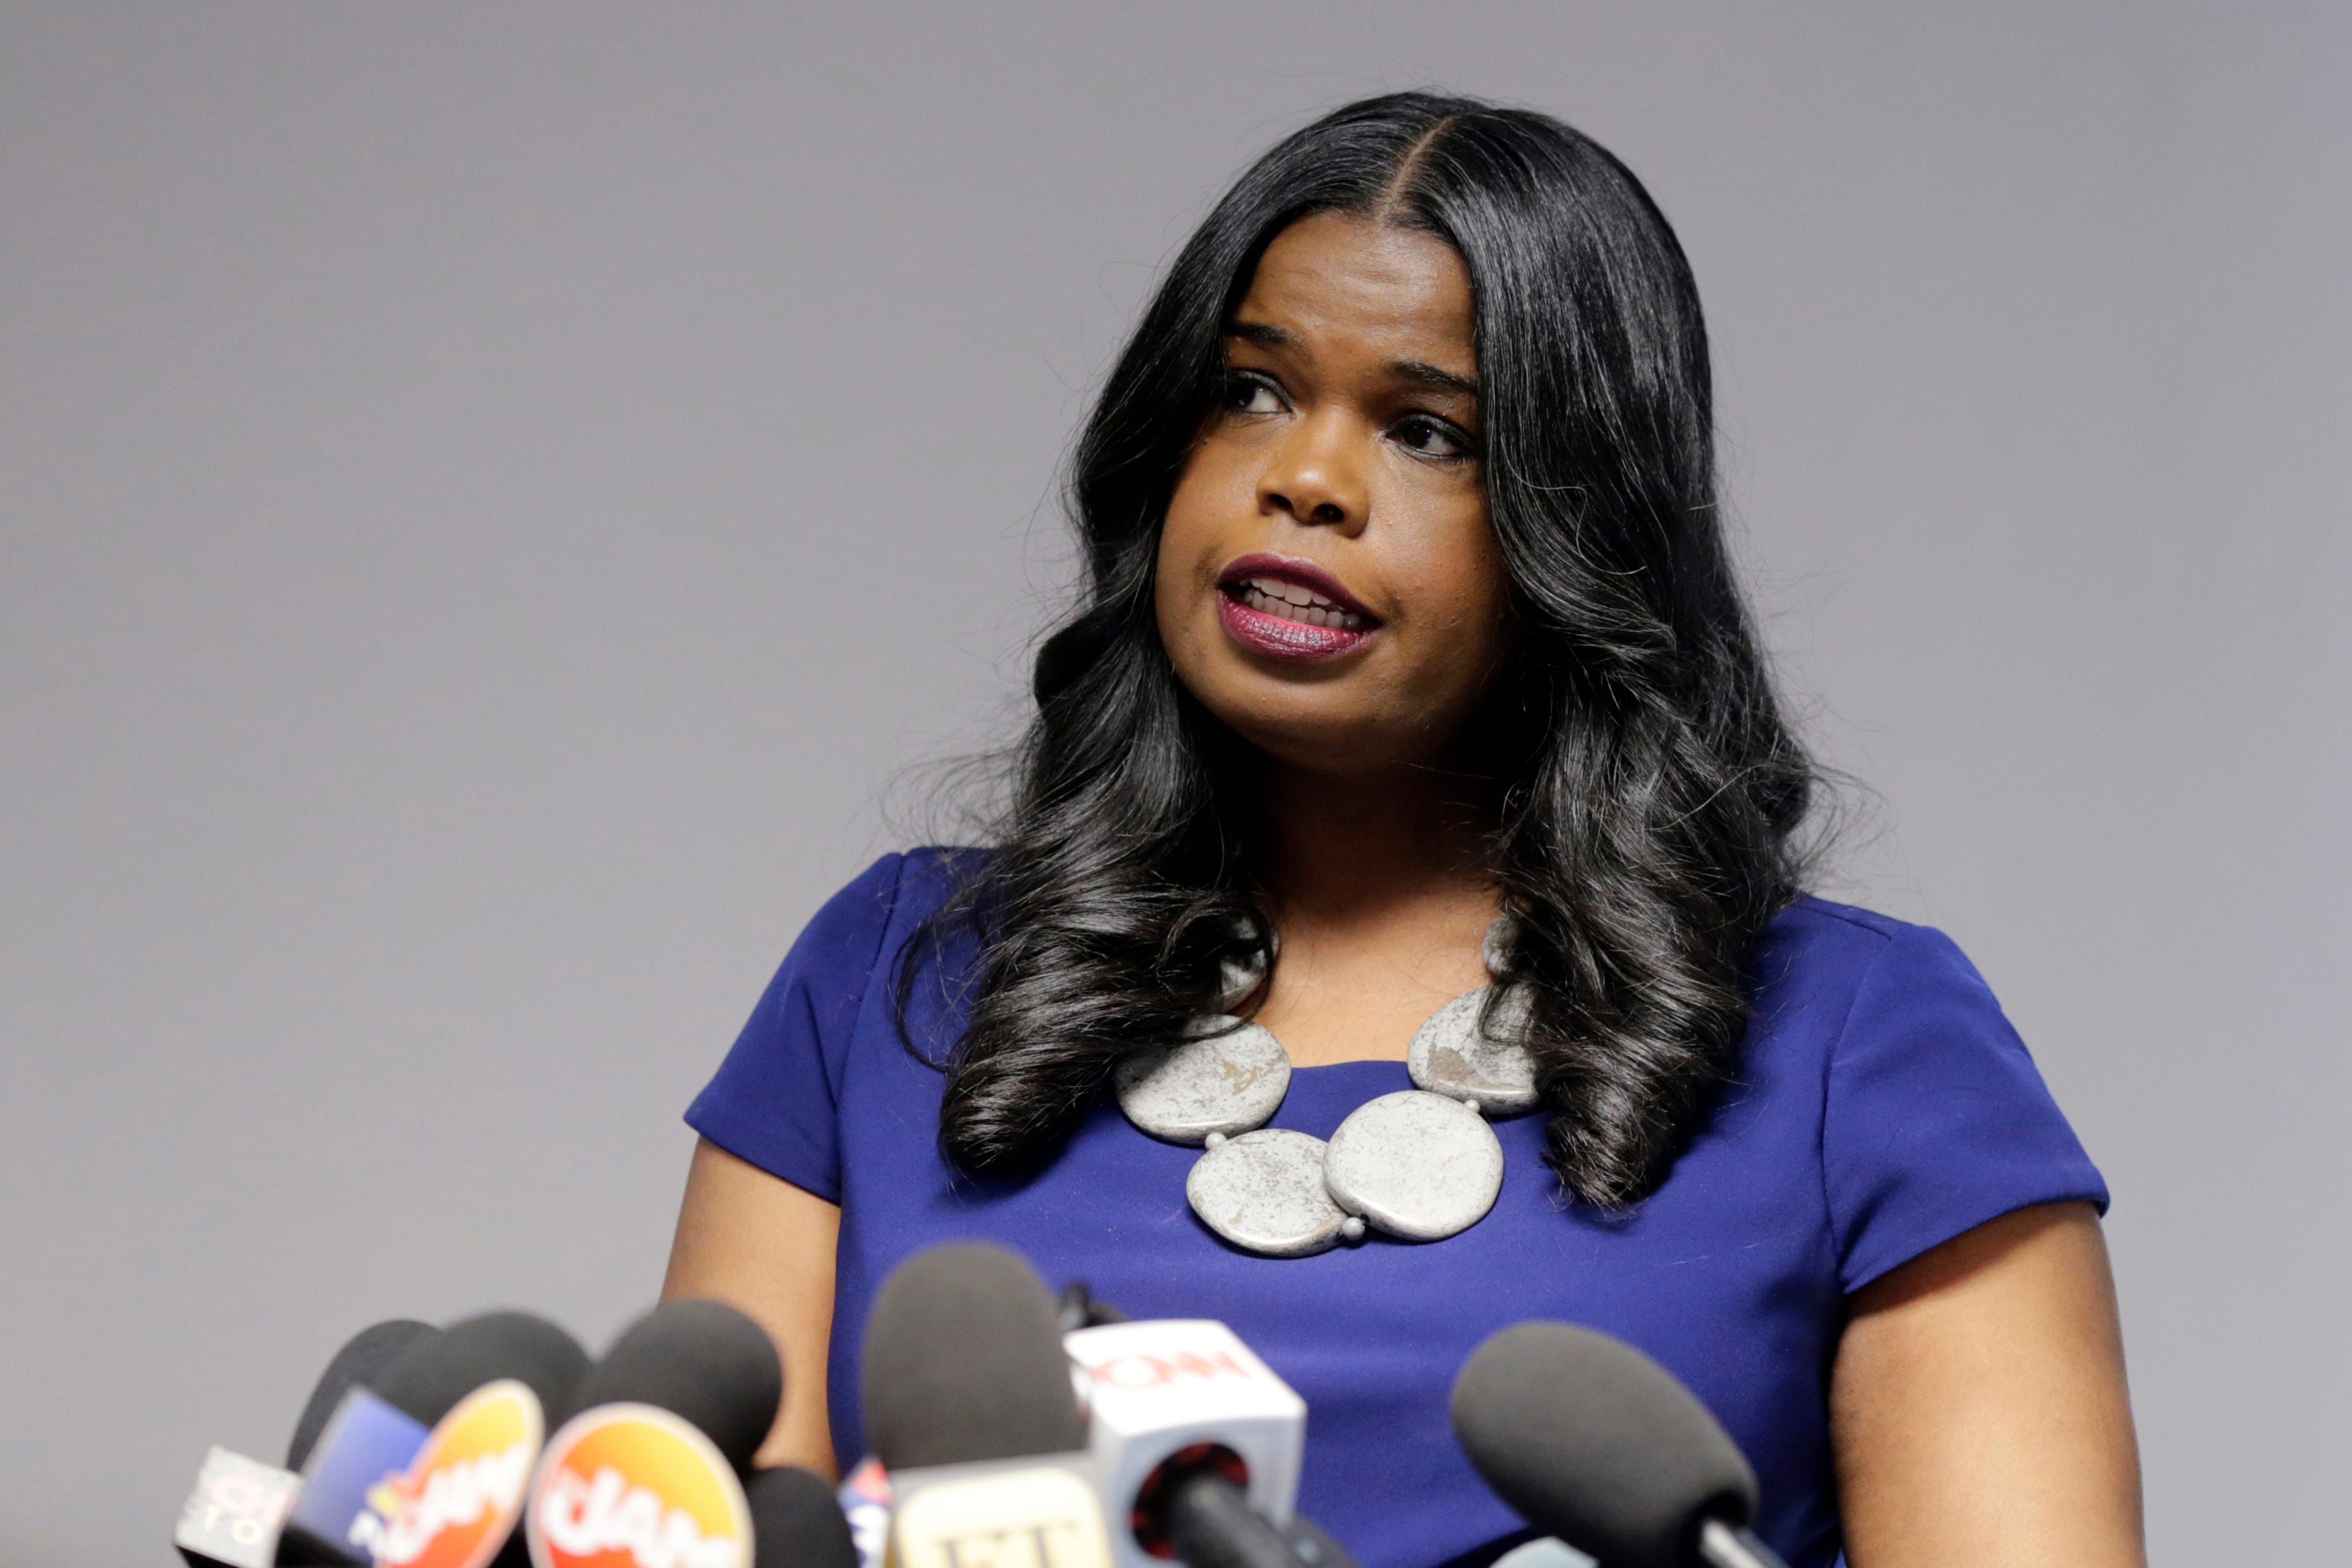 Cook County State's Attorney Kim Foxx speaks at a news conference, in Chicago on Feb. 22, 2019.